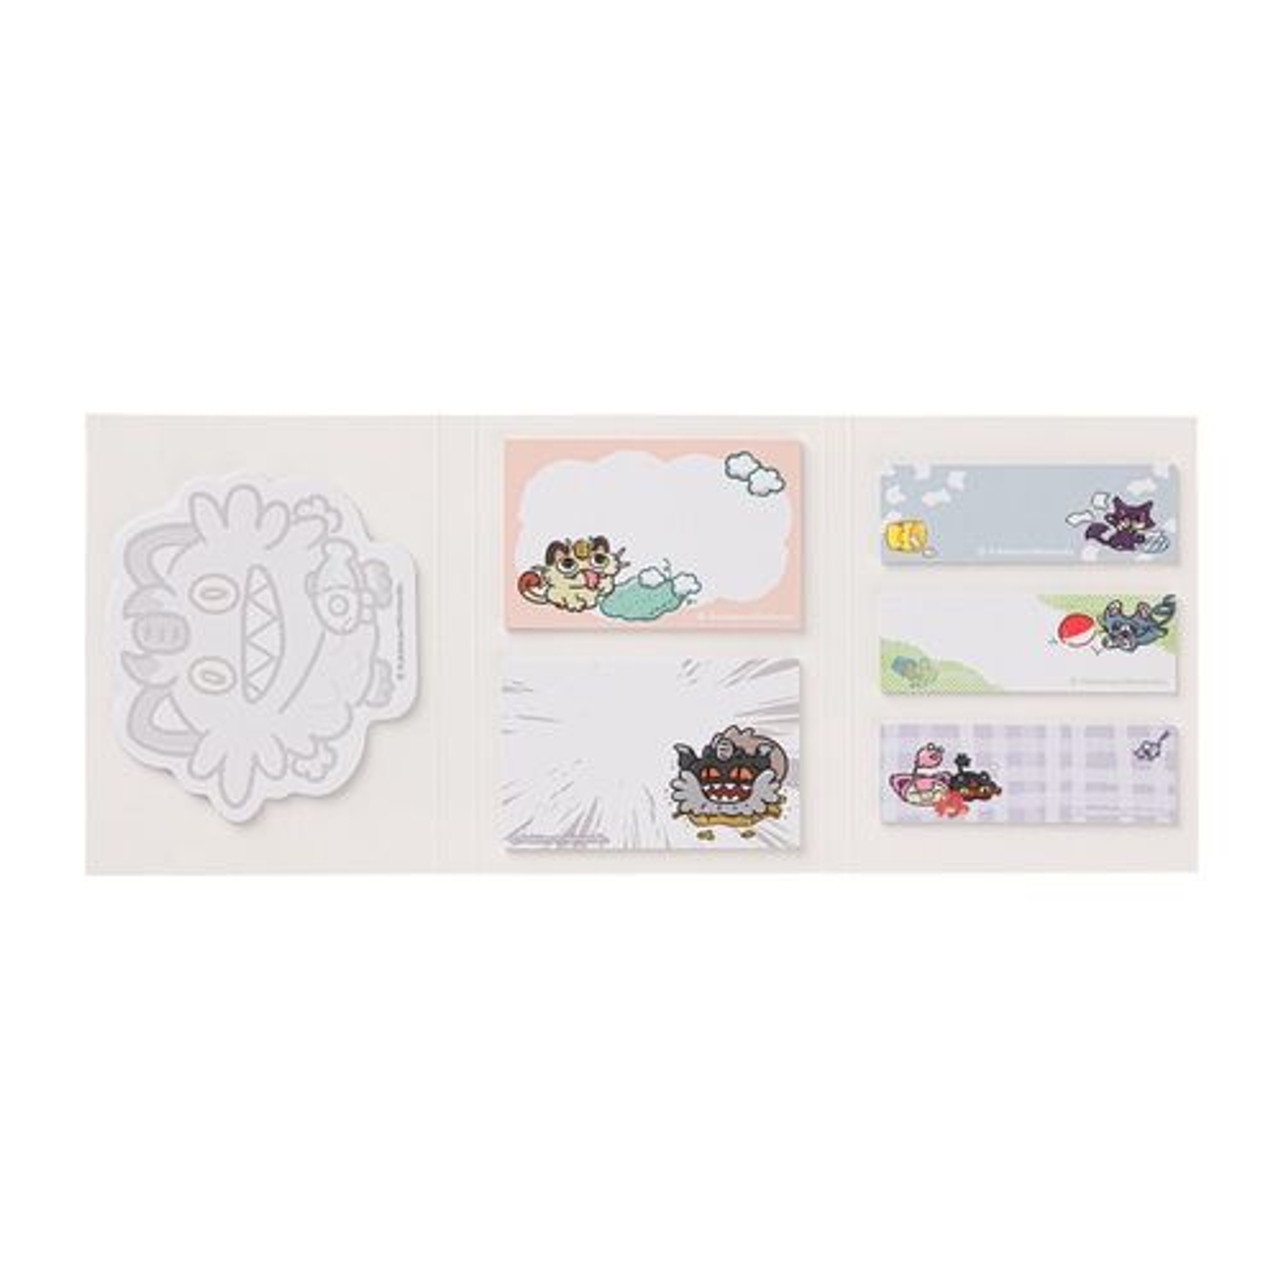 Pokemon Center Original Sticky Notes Set The Day Of Galarian Meowth